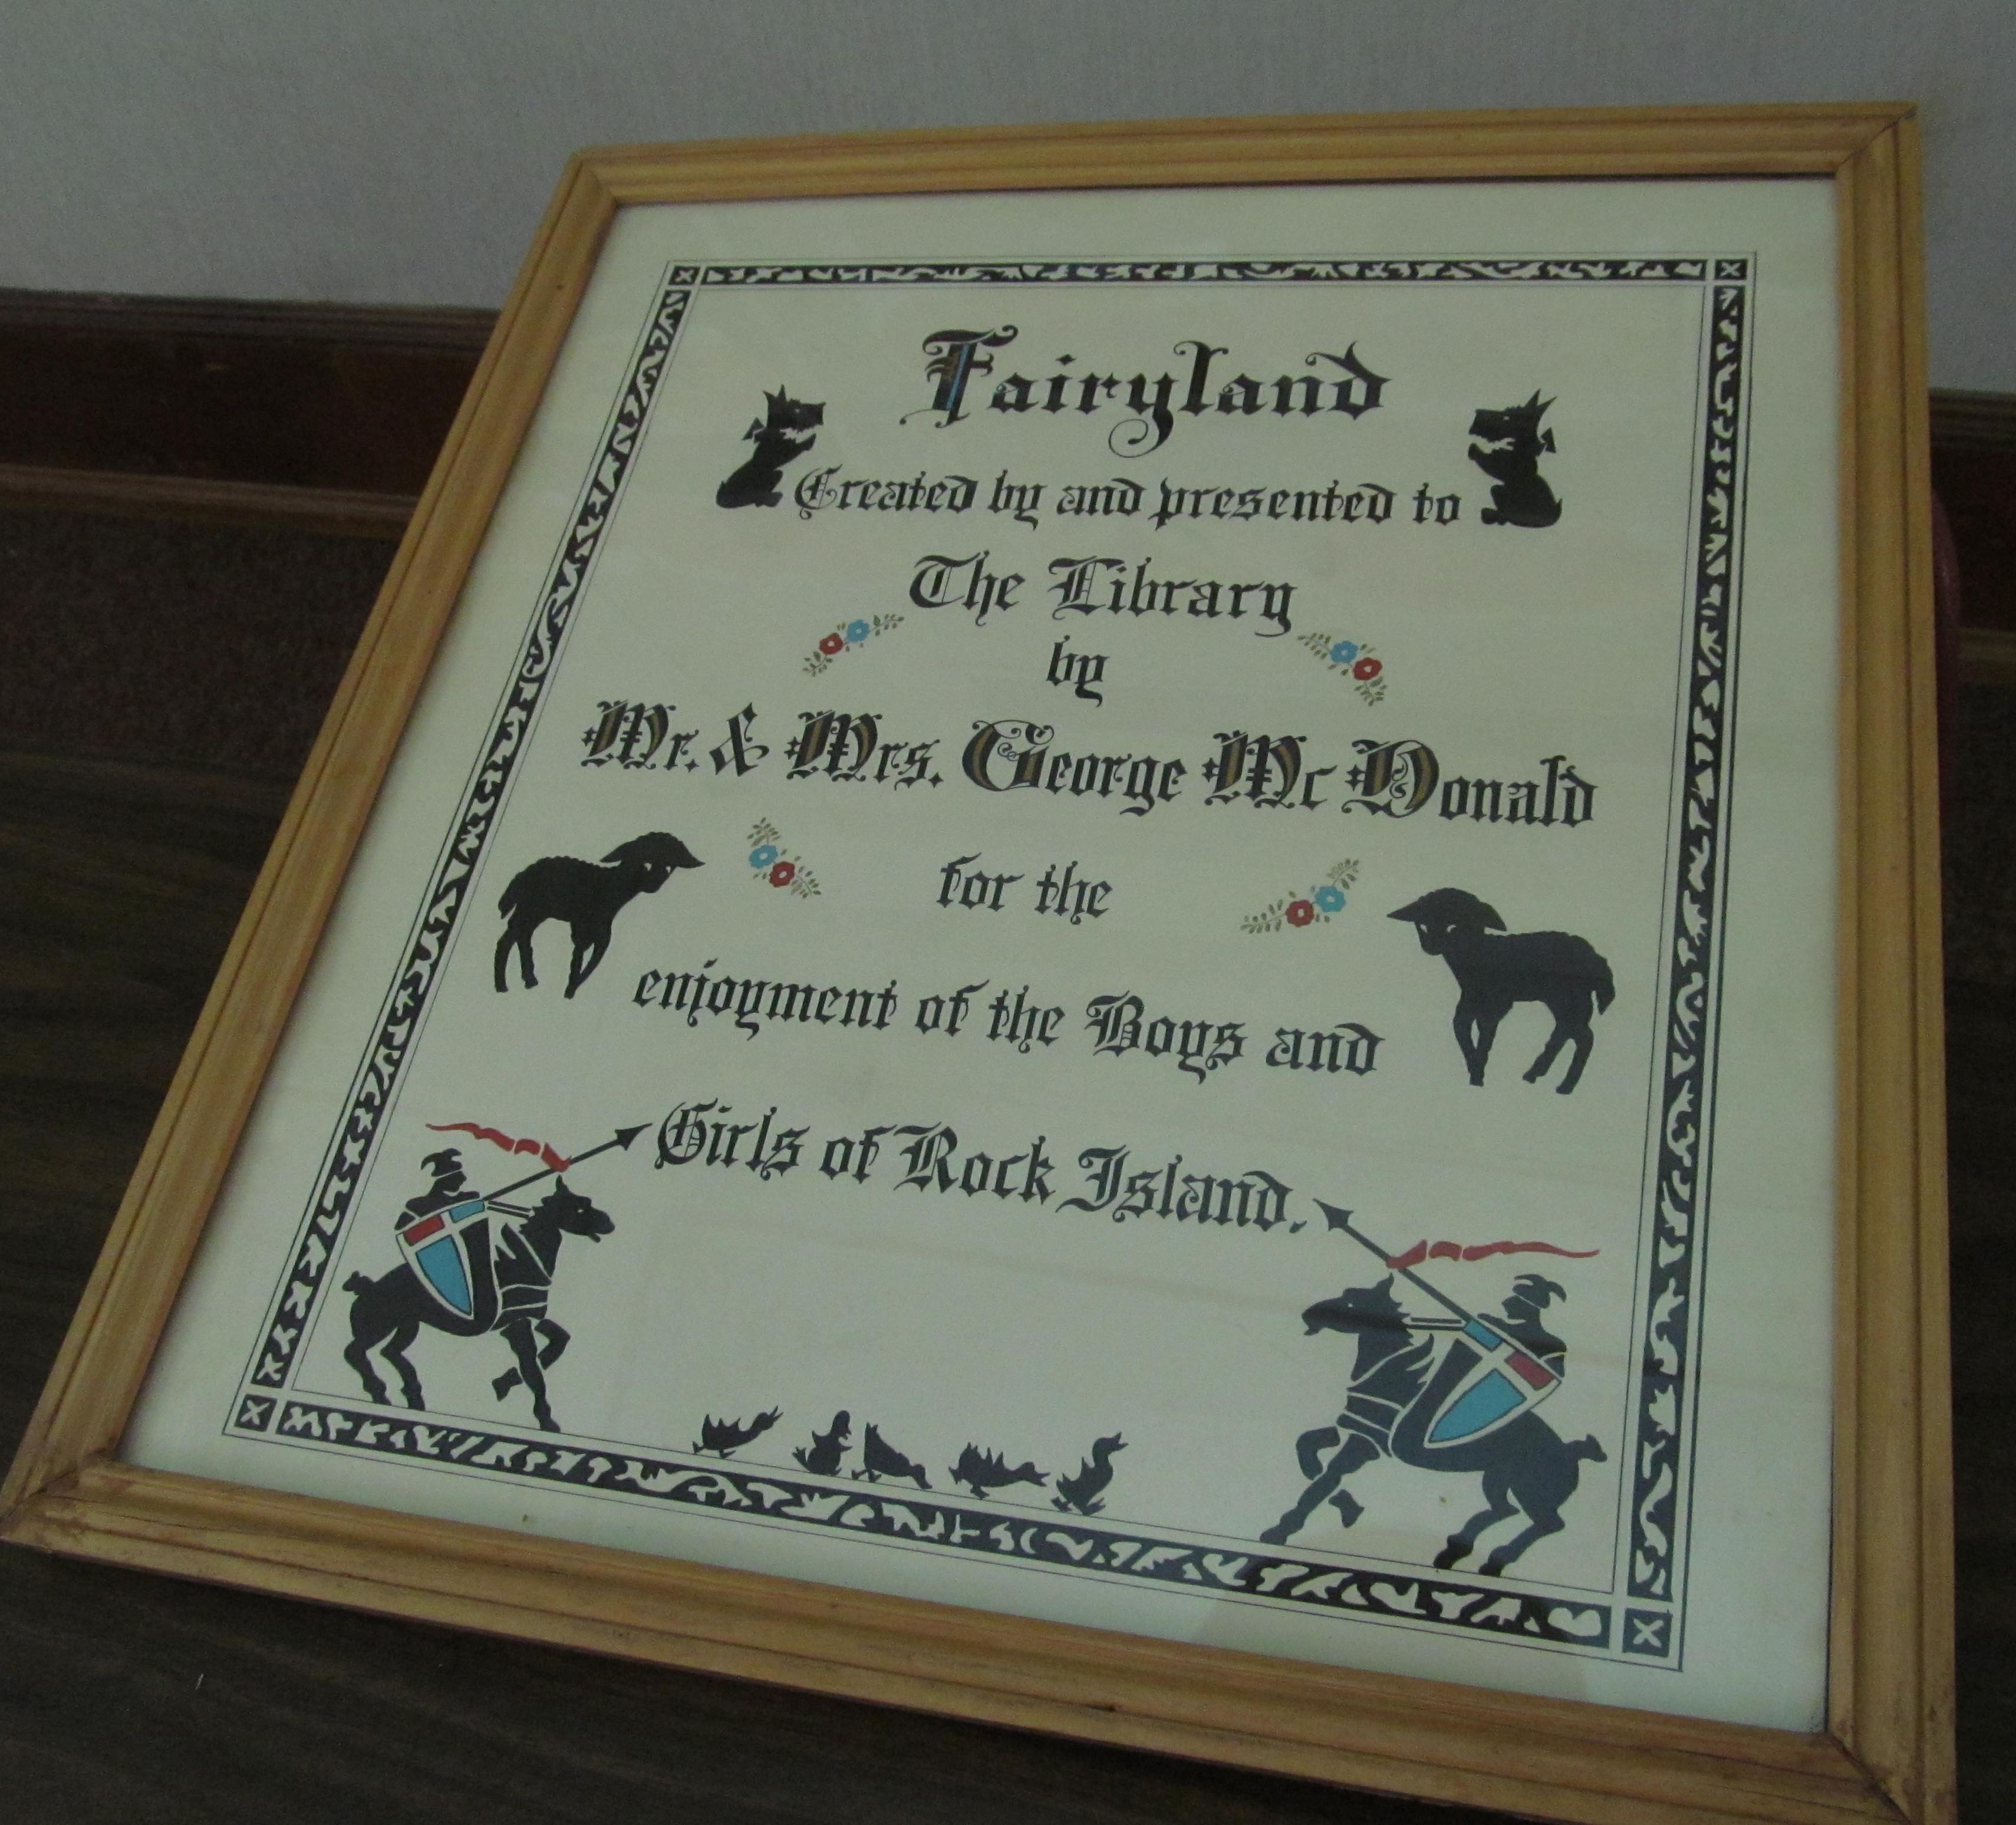 Framed information about the Fairyland Story Mountain exhibit